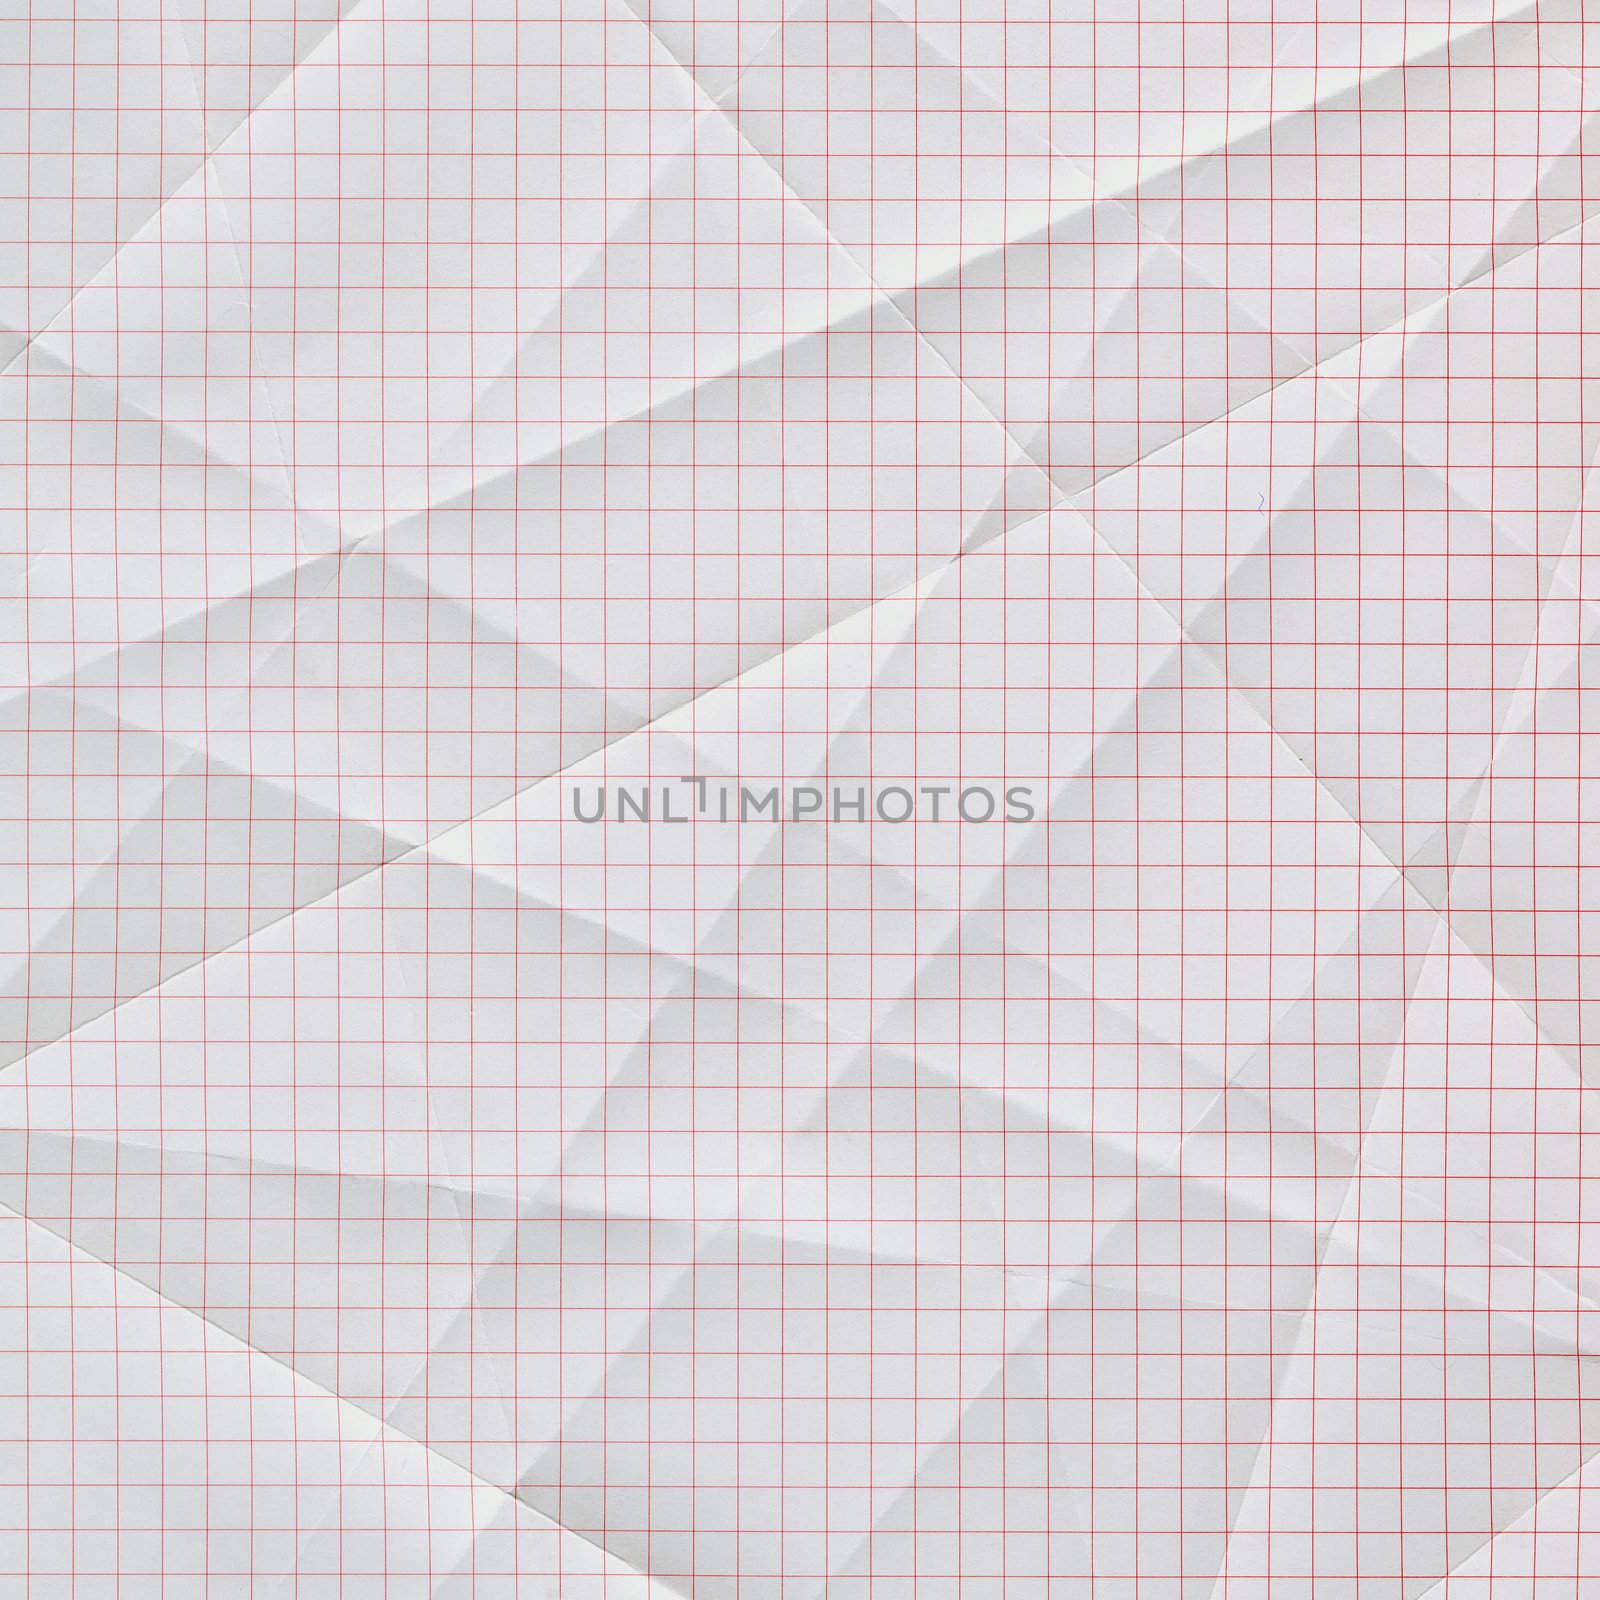 folded and creased graph paper by PixelsAway